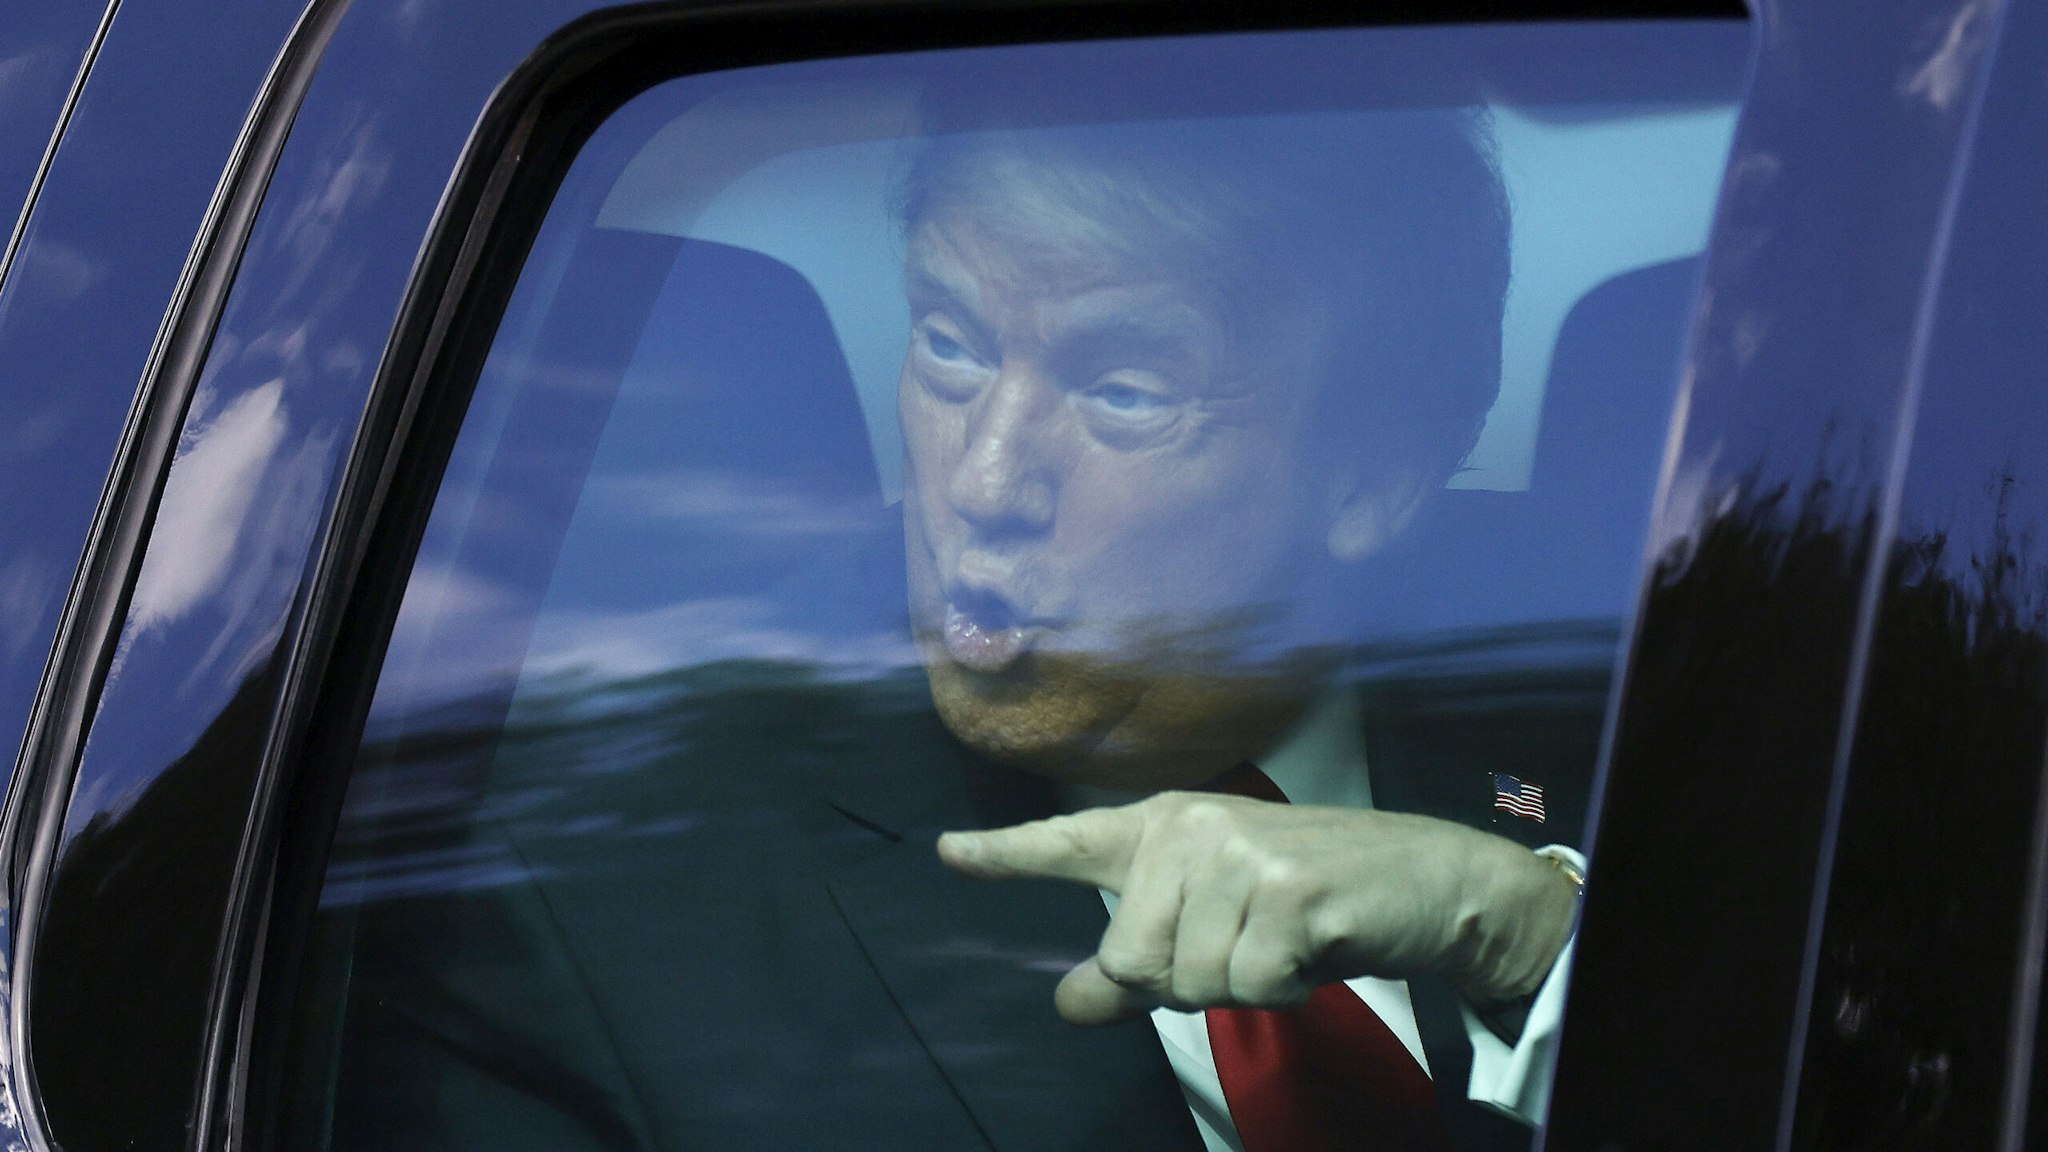 WEST PALM BEACH, FLORIDA - JANUARY 20: Outgoing US President Donald Trump waves to supporters lined along on the route to his Mar-a-Lago estate on January 20, 2021 in West Palm Beach, Florida. Trump, the first president in more than 150 years to refuse to attend his successor's inauguration, is expected to spend the final minutes of his presidency at his Mar-a-Lago estate in Florida.